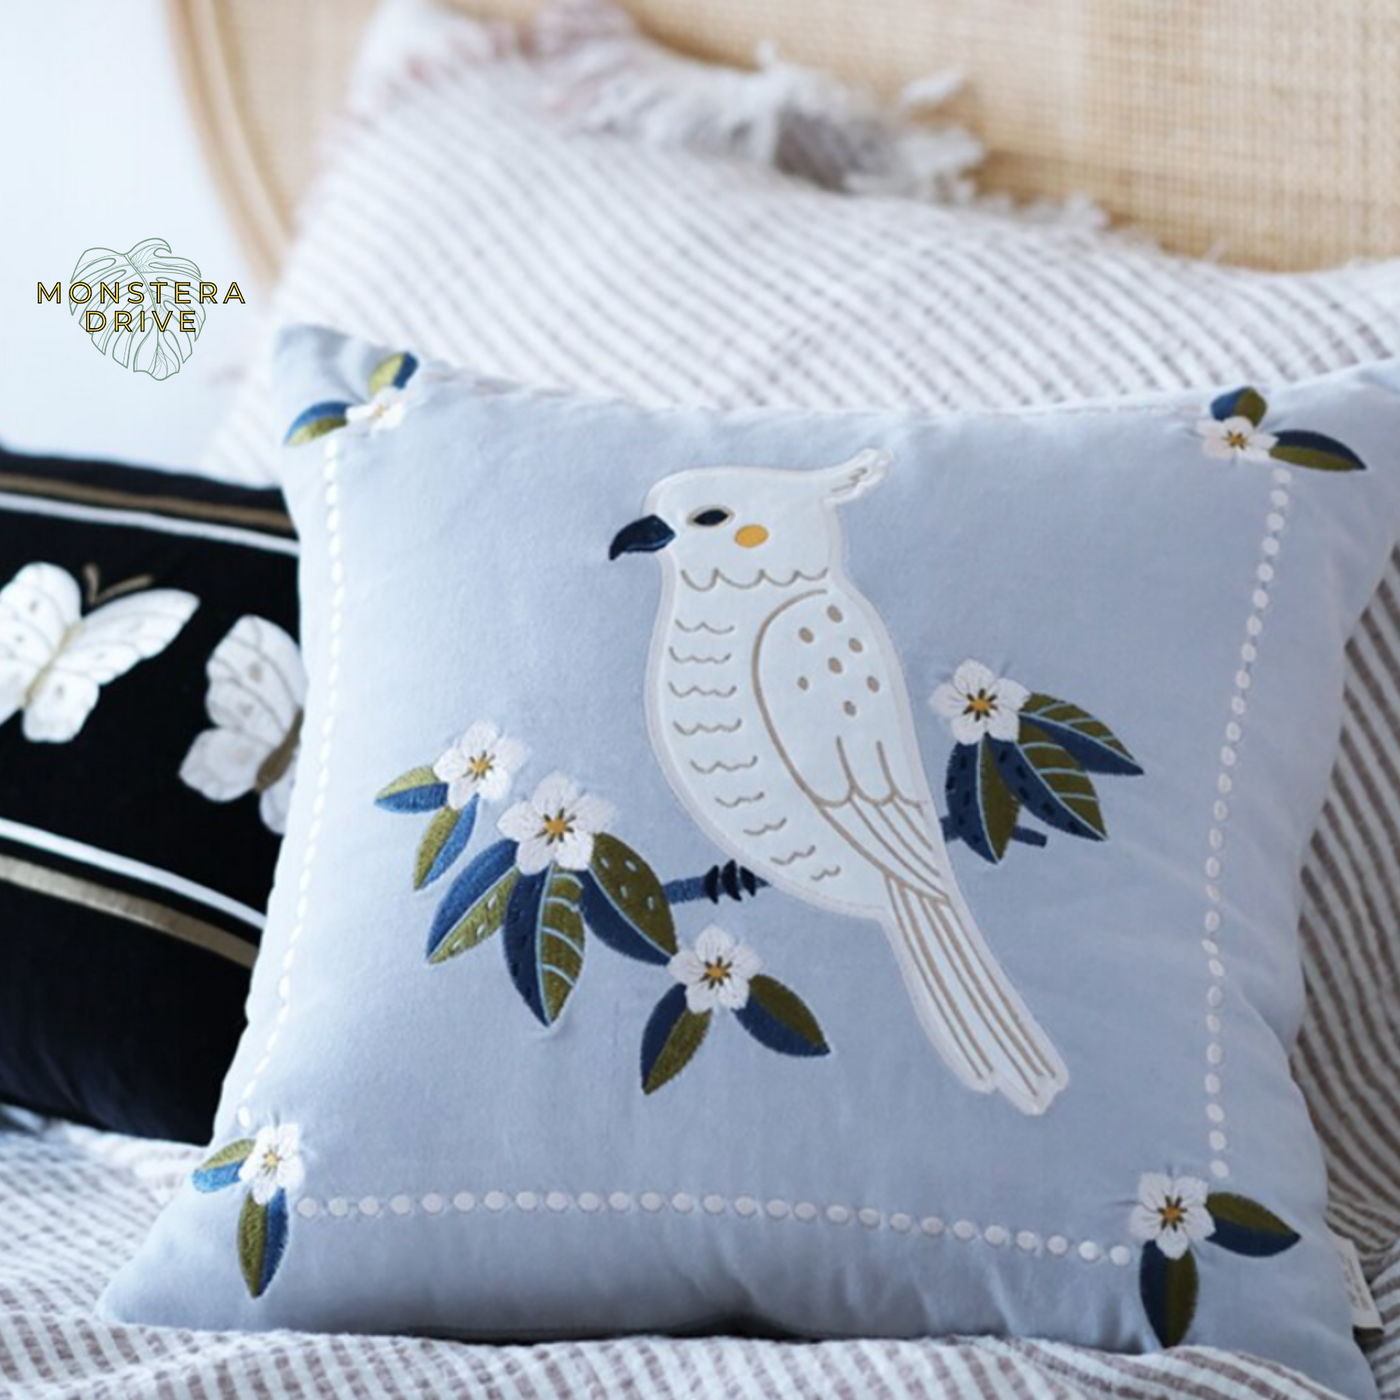 Vintage Inspired Velvet Floral Embroidered White Macaw Pillow Cover 18x18 inch